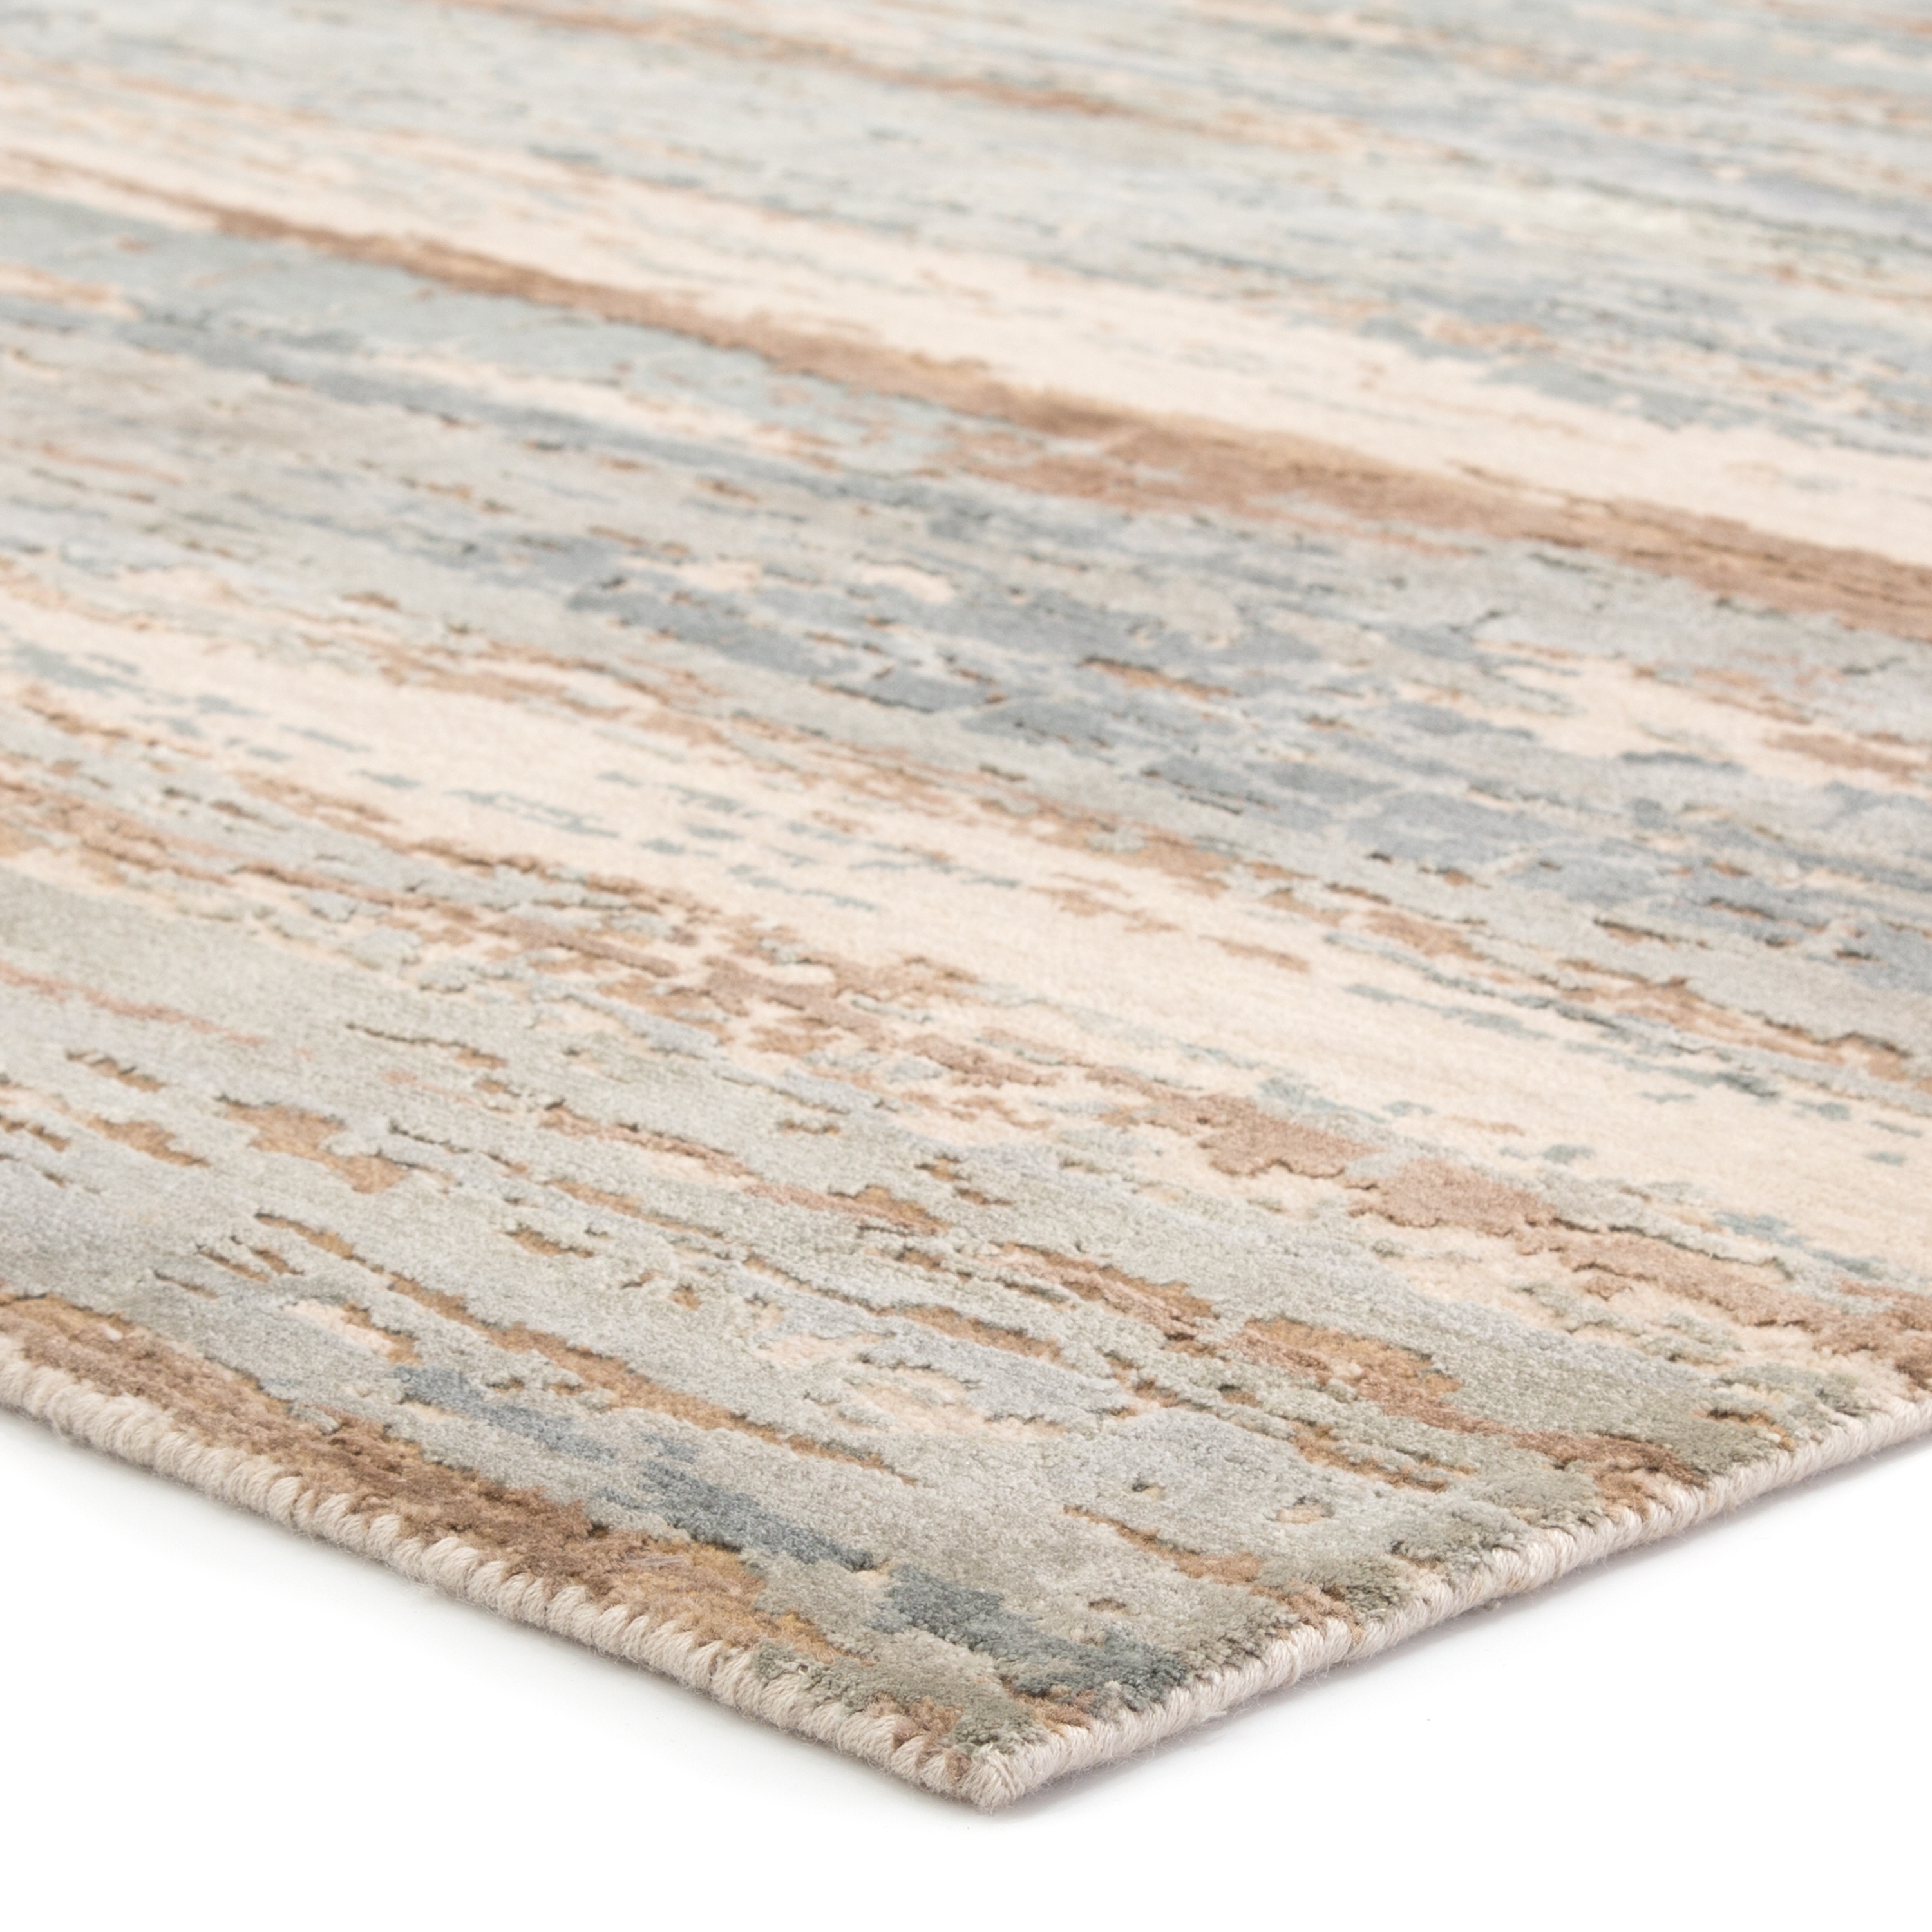 Kavi by Bandi Hand-Knotted Abstract Light Blue/ Tan Area Rug (9'X12') - Image 1